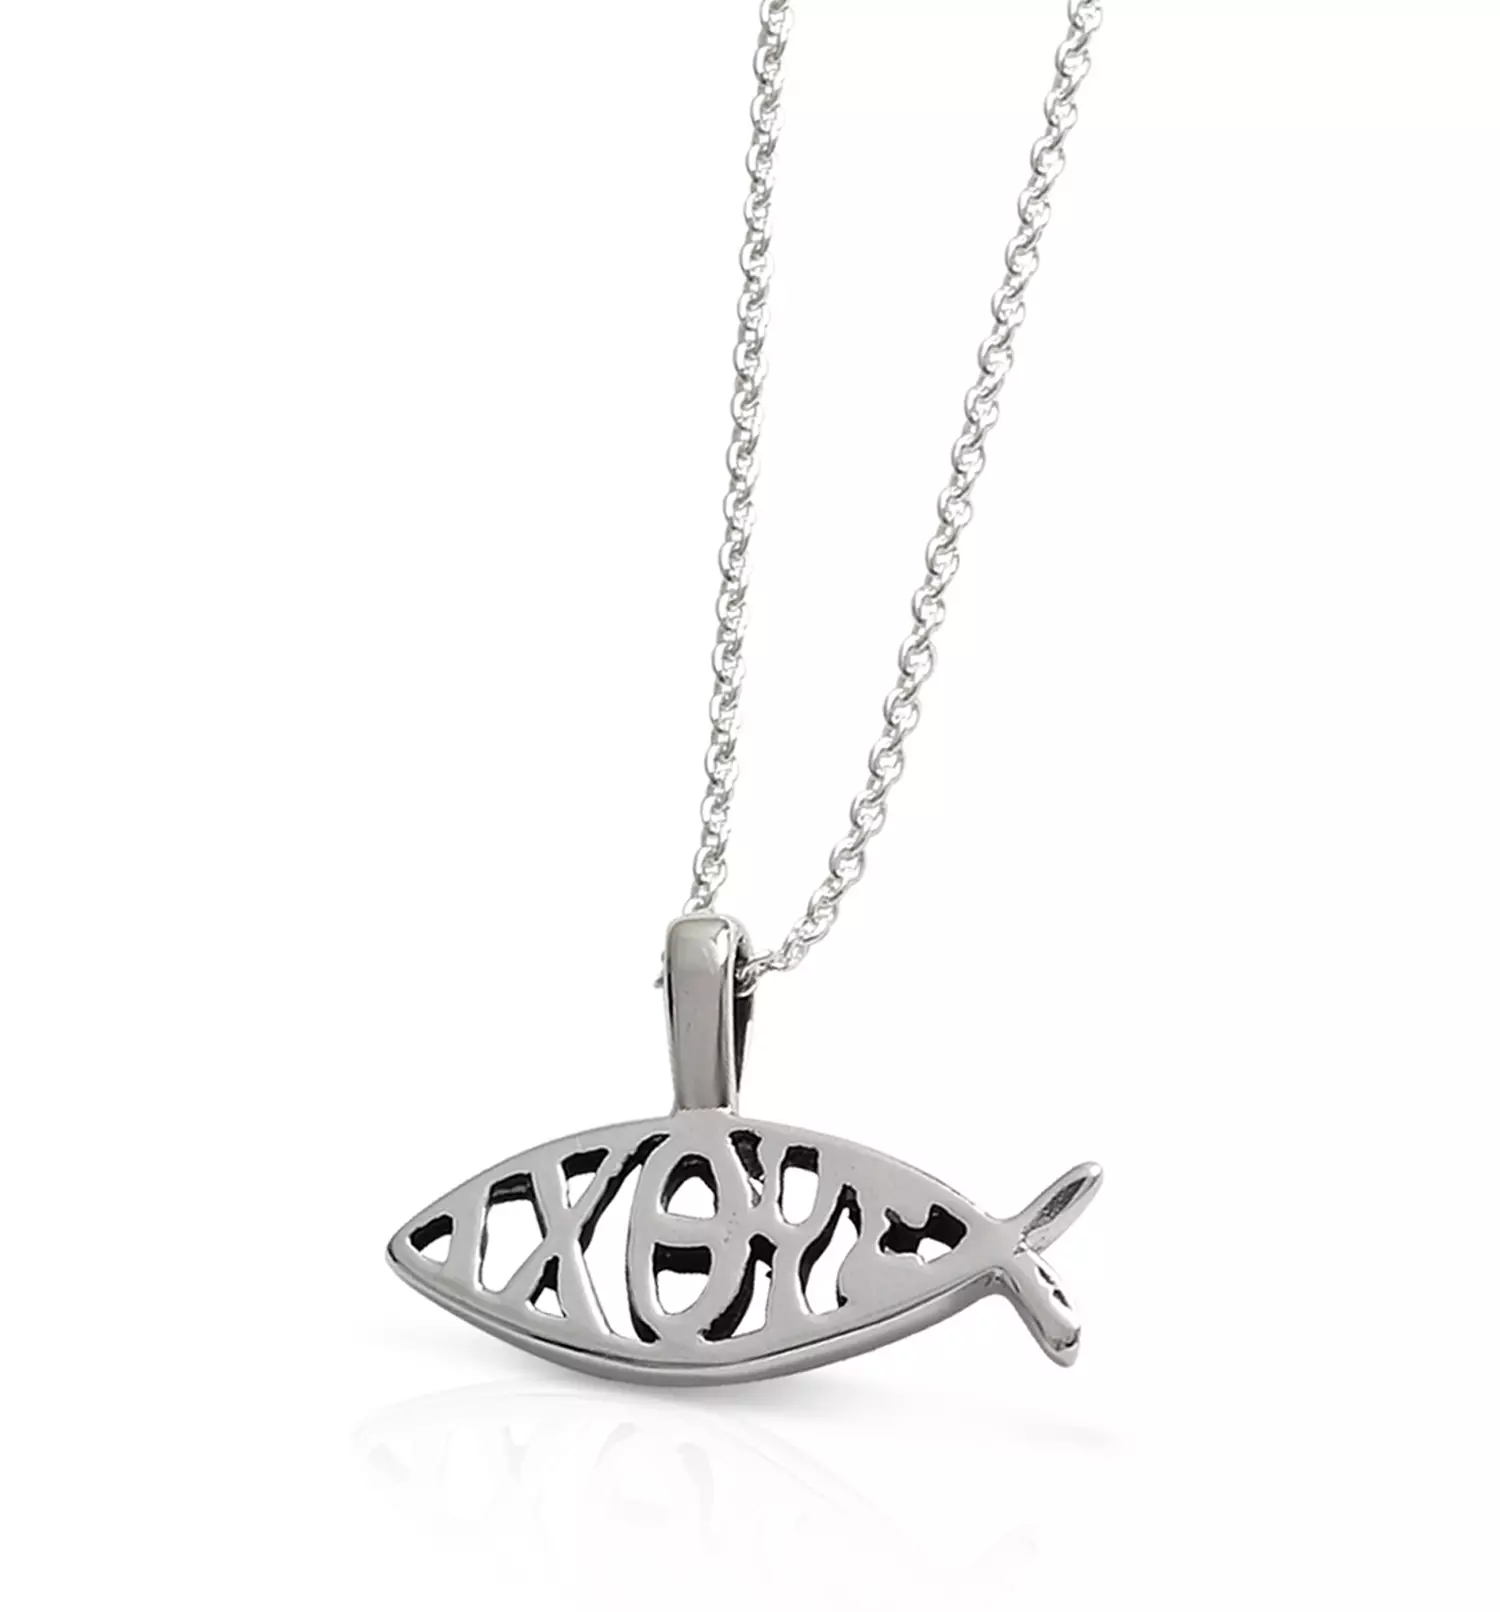 Sterling silver Fish and Ixoye Pendant